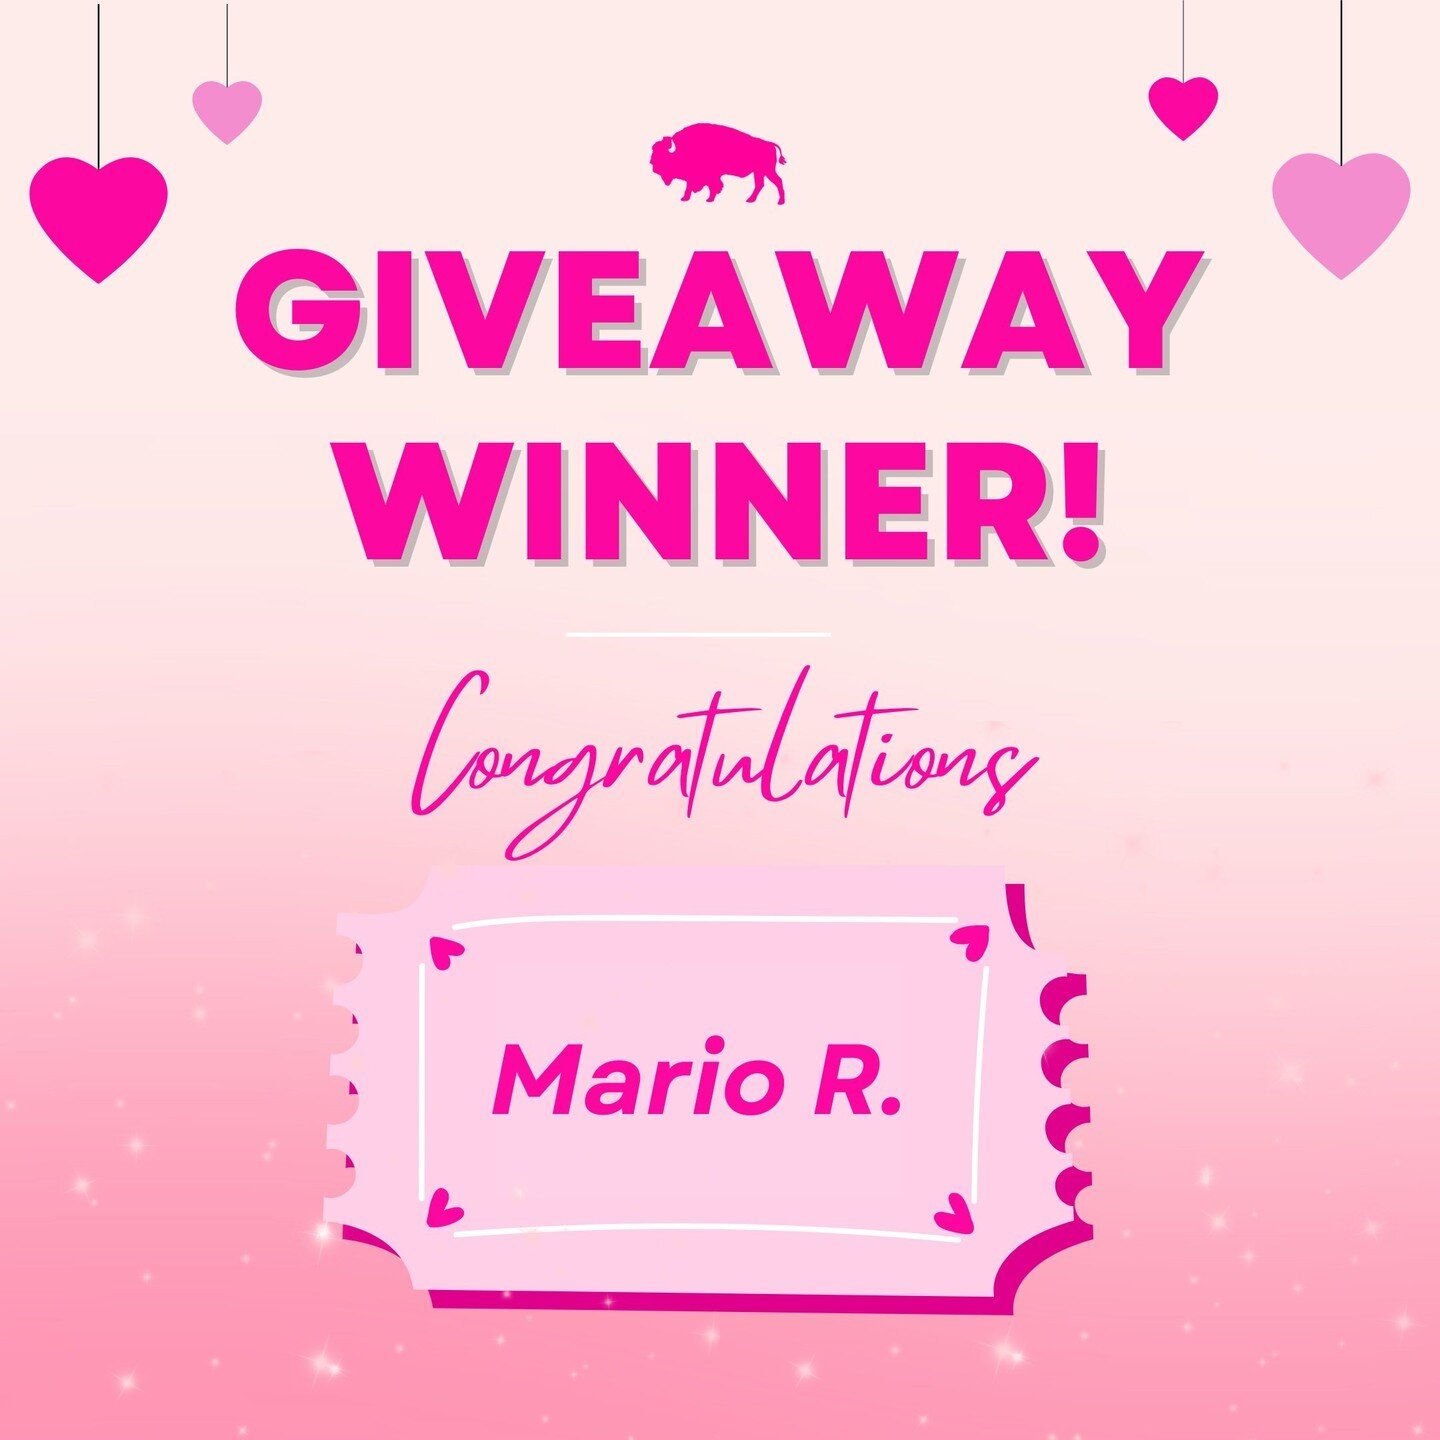 Congratulations Mario R! You are the winner of a free ticket to @HRBuffalo&rsquo;s HR Compliance Update Webinar giveaway! 🎉✨ Get ready to enhance your HR expertise and stay compliant with the latest regulations!

If you didn&rsquo;t win but would li